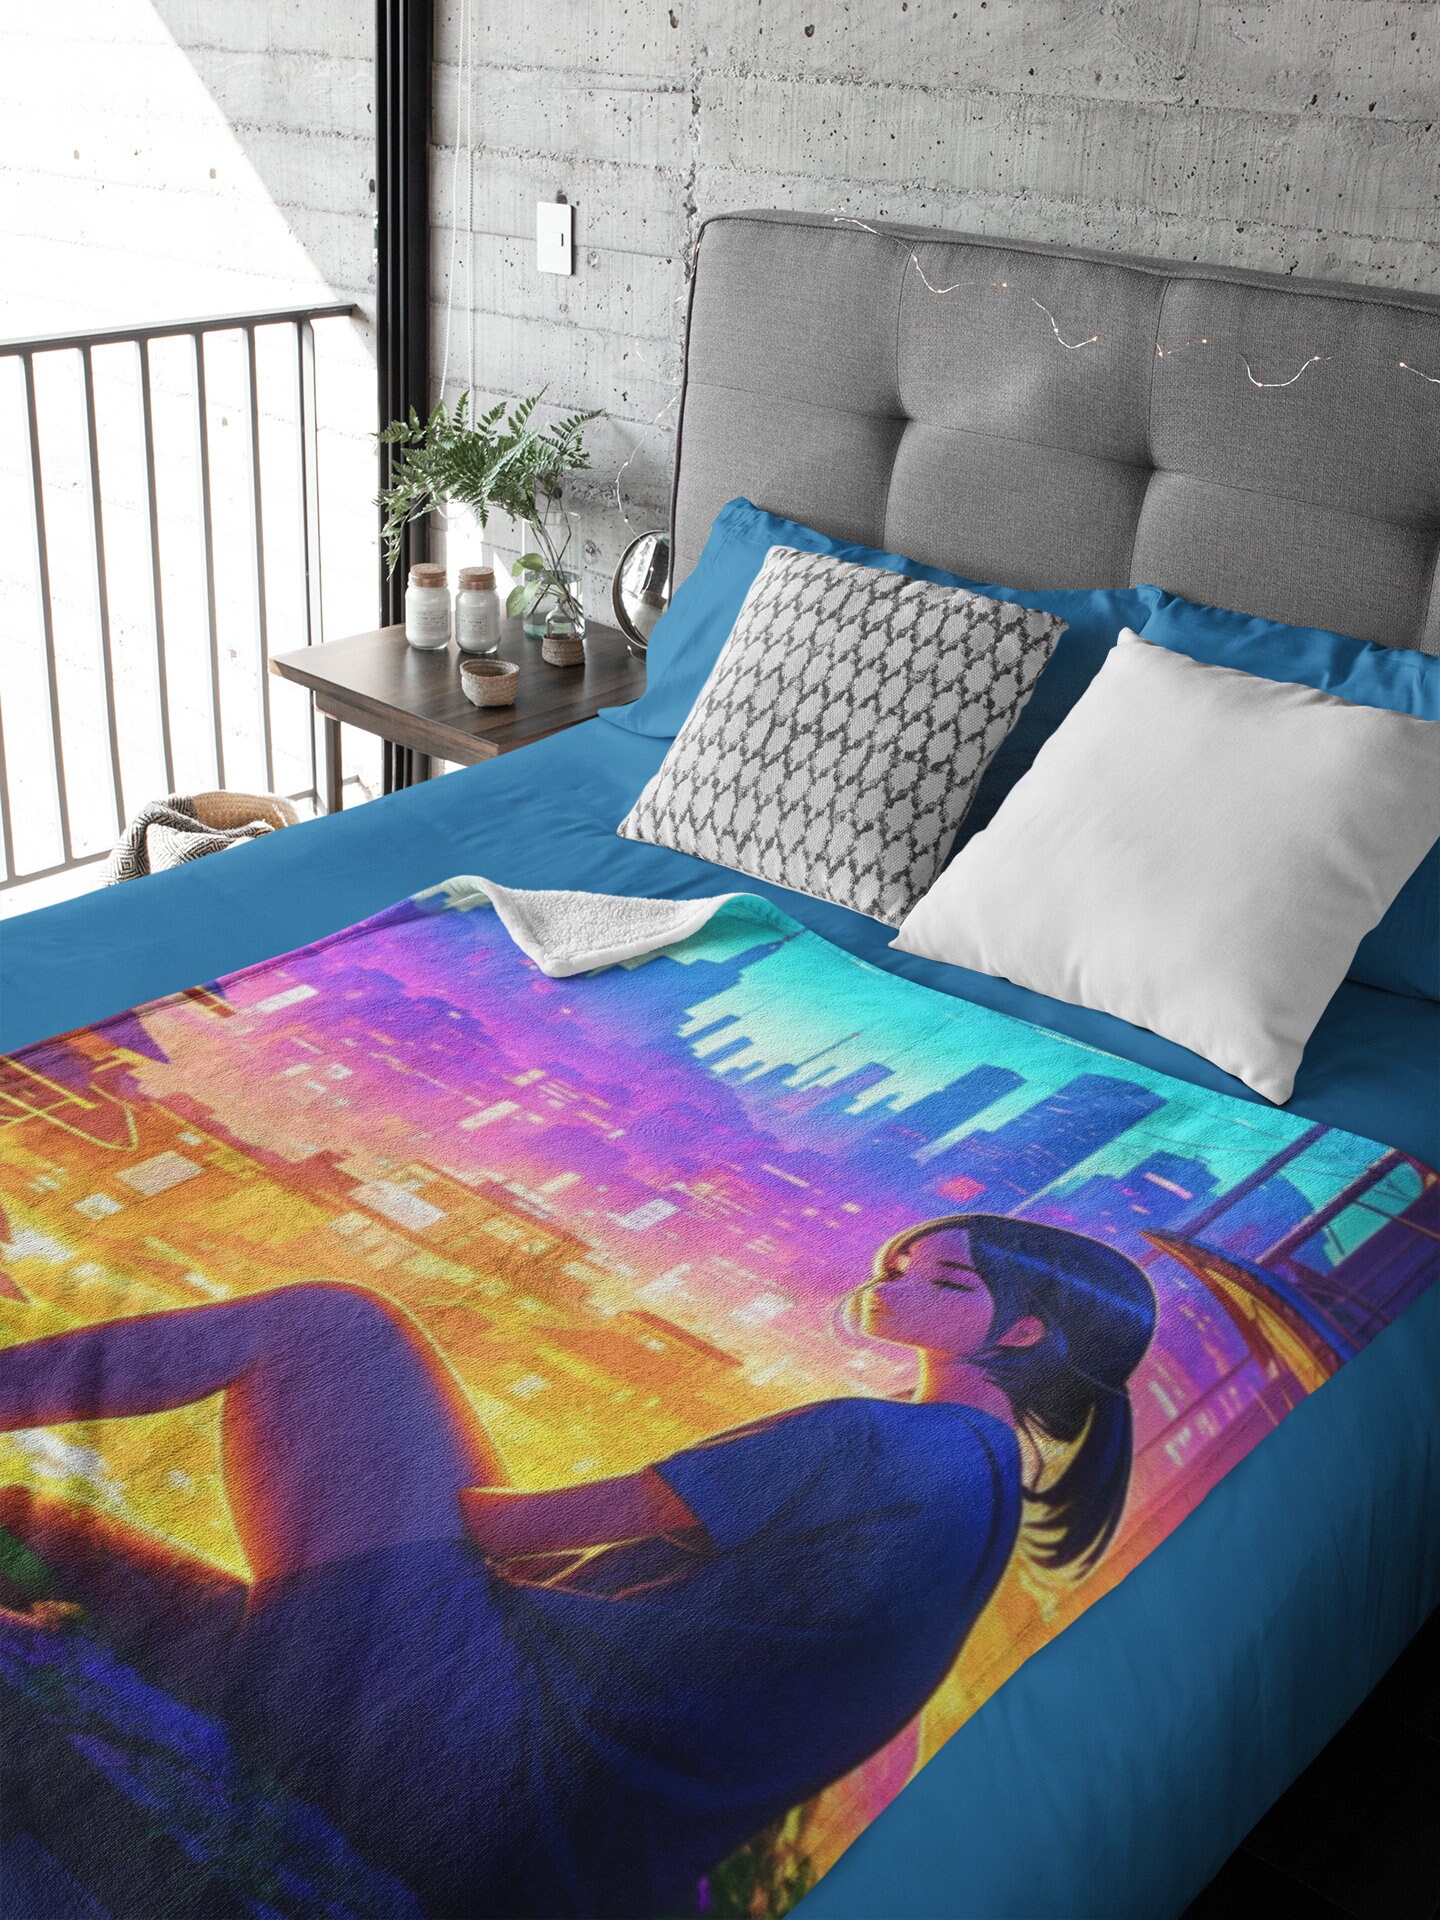 Anime Bed Set ONE PIECE Duvet Cover Bedding Sets Luffy Zoro Nami Comforter  Cover, Cartoon Quilt Cover with Pillowcases - Walmart.com